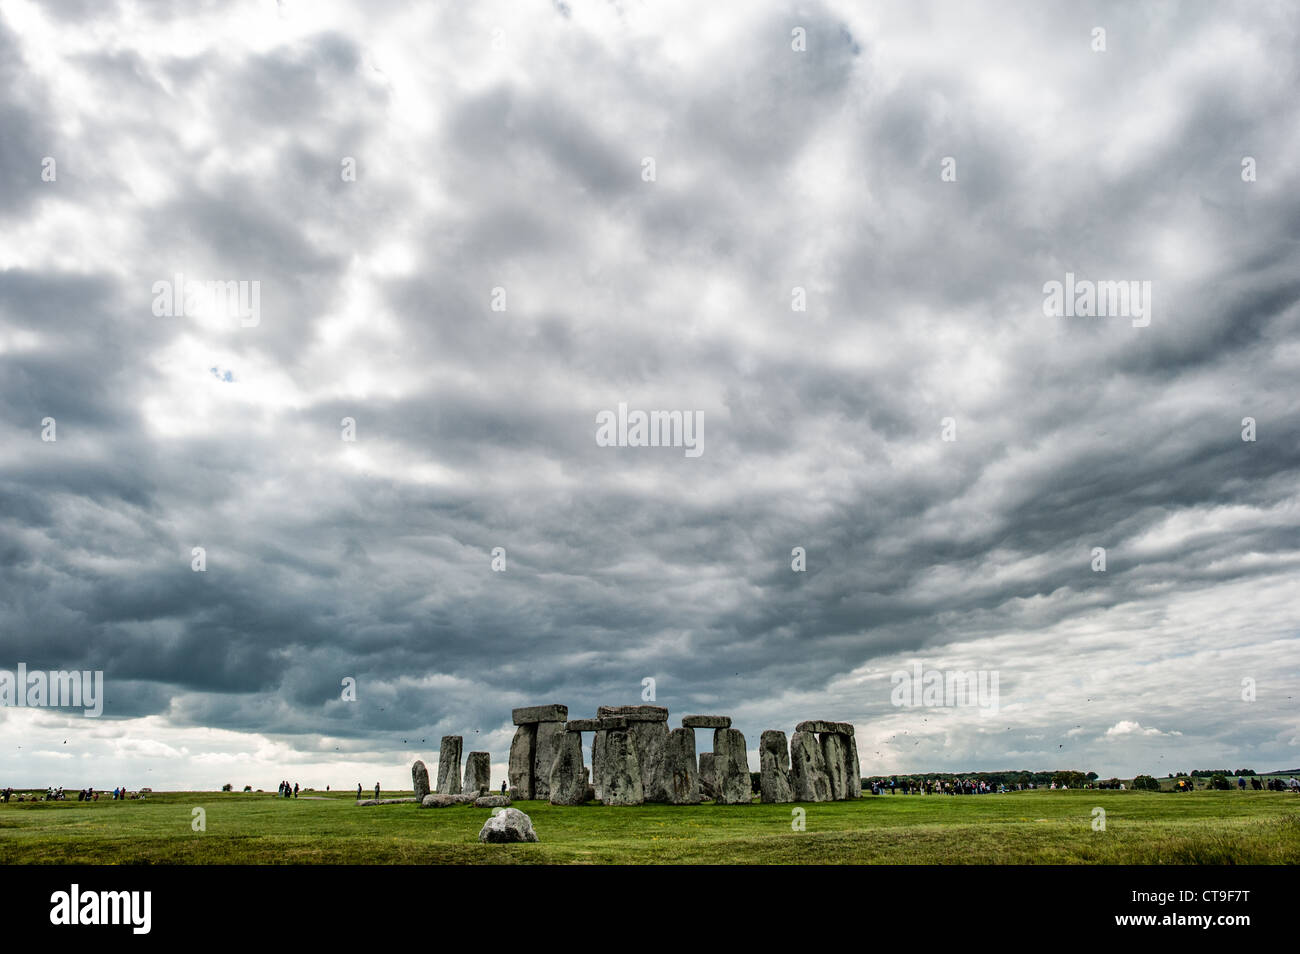 STONEHENGE, UK - LONDON, UK - Stonehenge with Threatening Skies. Believed to have been built somewhere between 2000 and 3000 BC, Stonehenge is one of the United Kingdom's most distinctive landmarks. It's function and purpose remains a matter of conjecture, although many theories have been offered. It consists of a series of large standing stones, some of which have toppled over the centuries. Stonehenge is located in Salisbury Plain west of London. Stock Photo